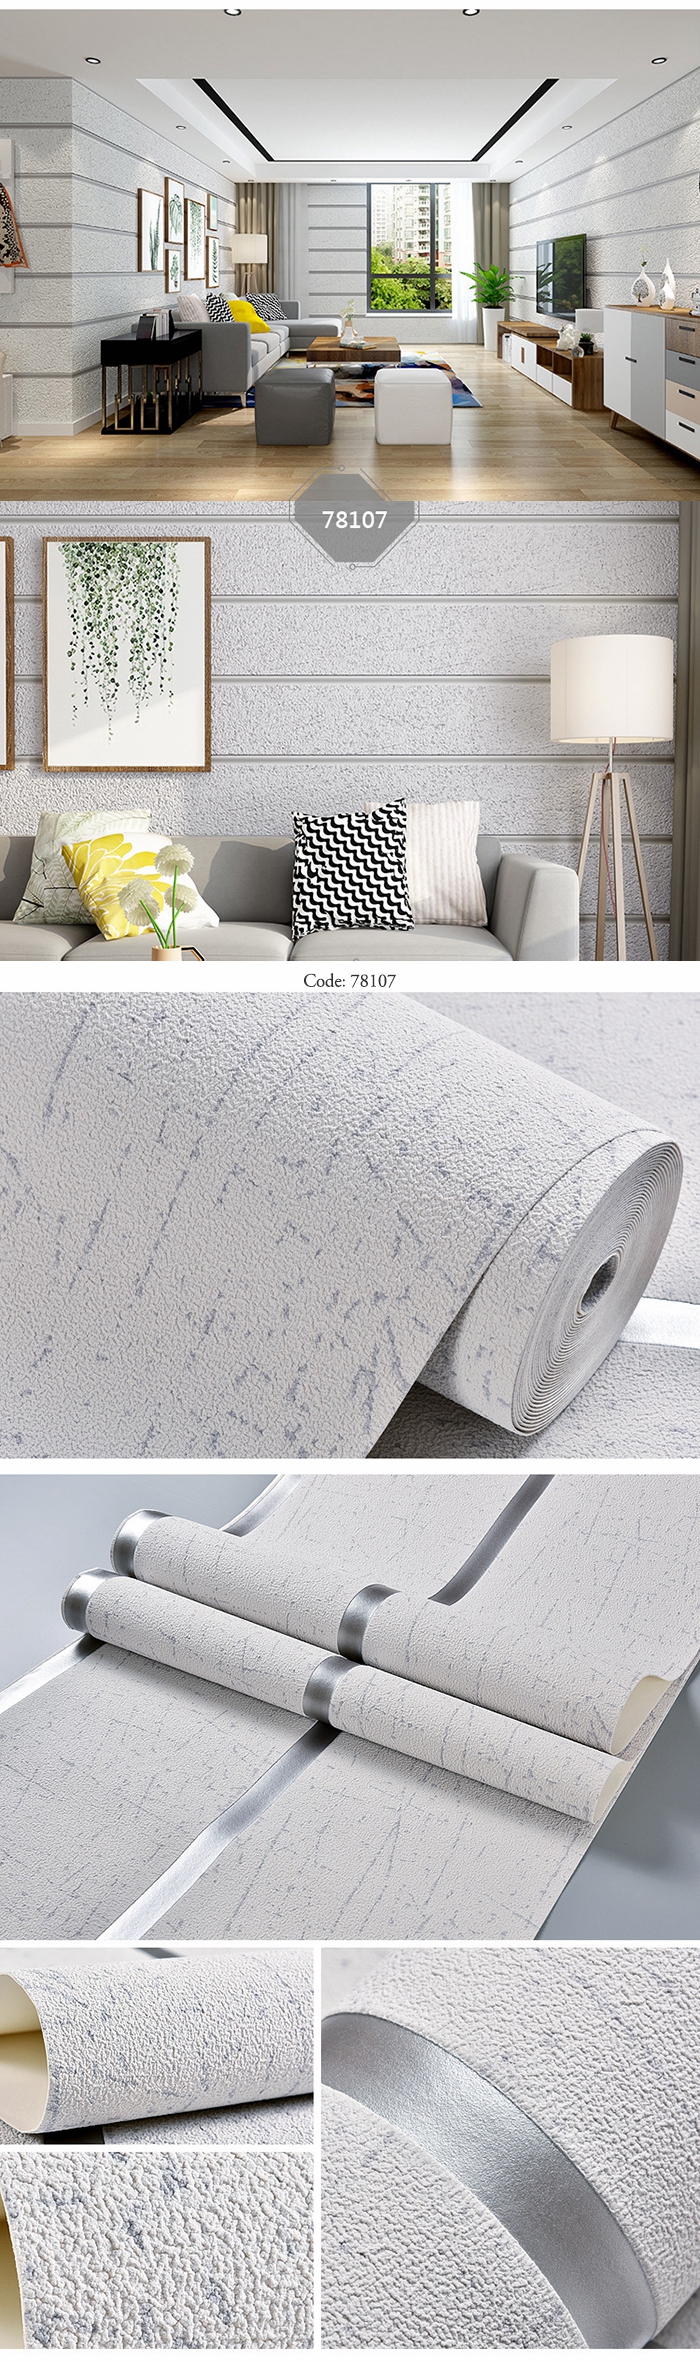 Soundproof 3d Stereoscopic Nonwoven Marble Effect Modern - Coffee Table - HD Wallpaper 